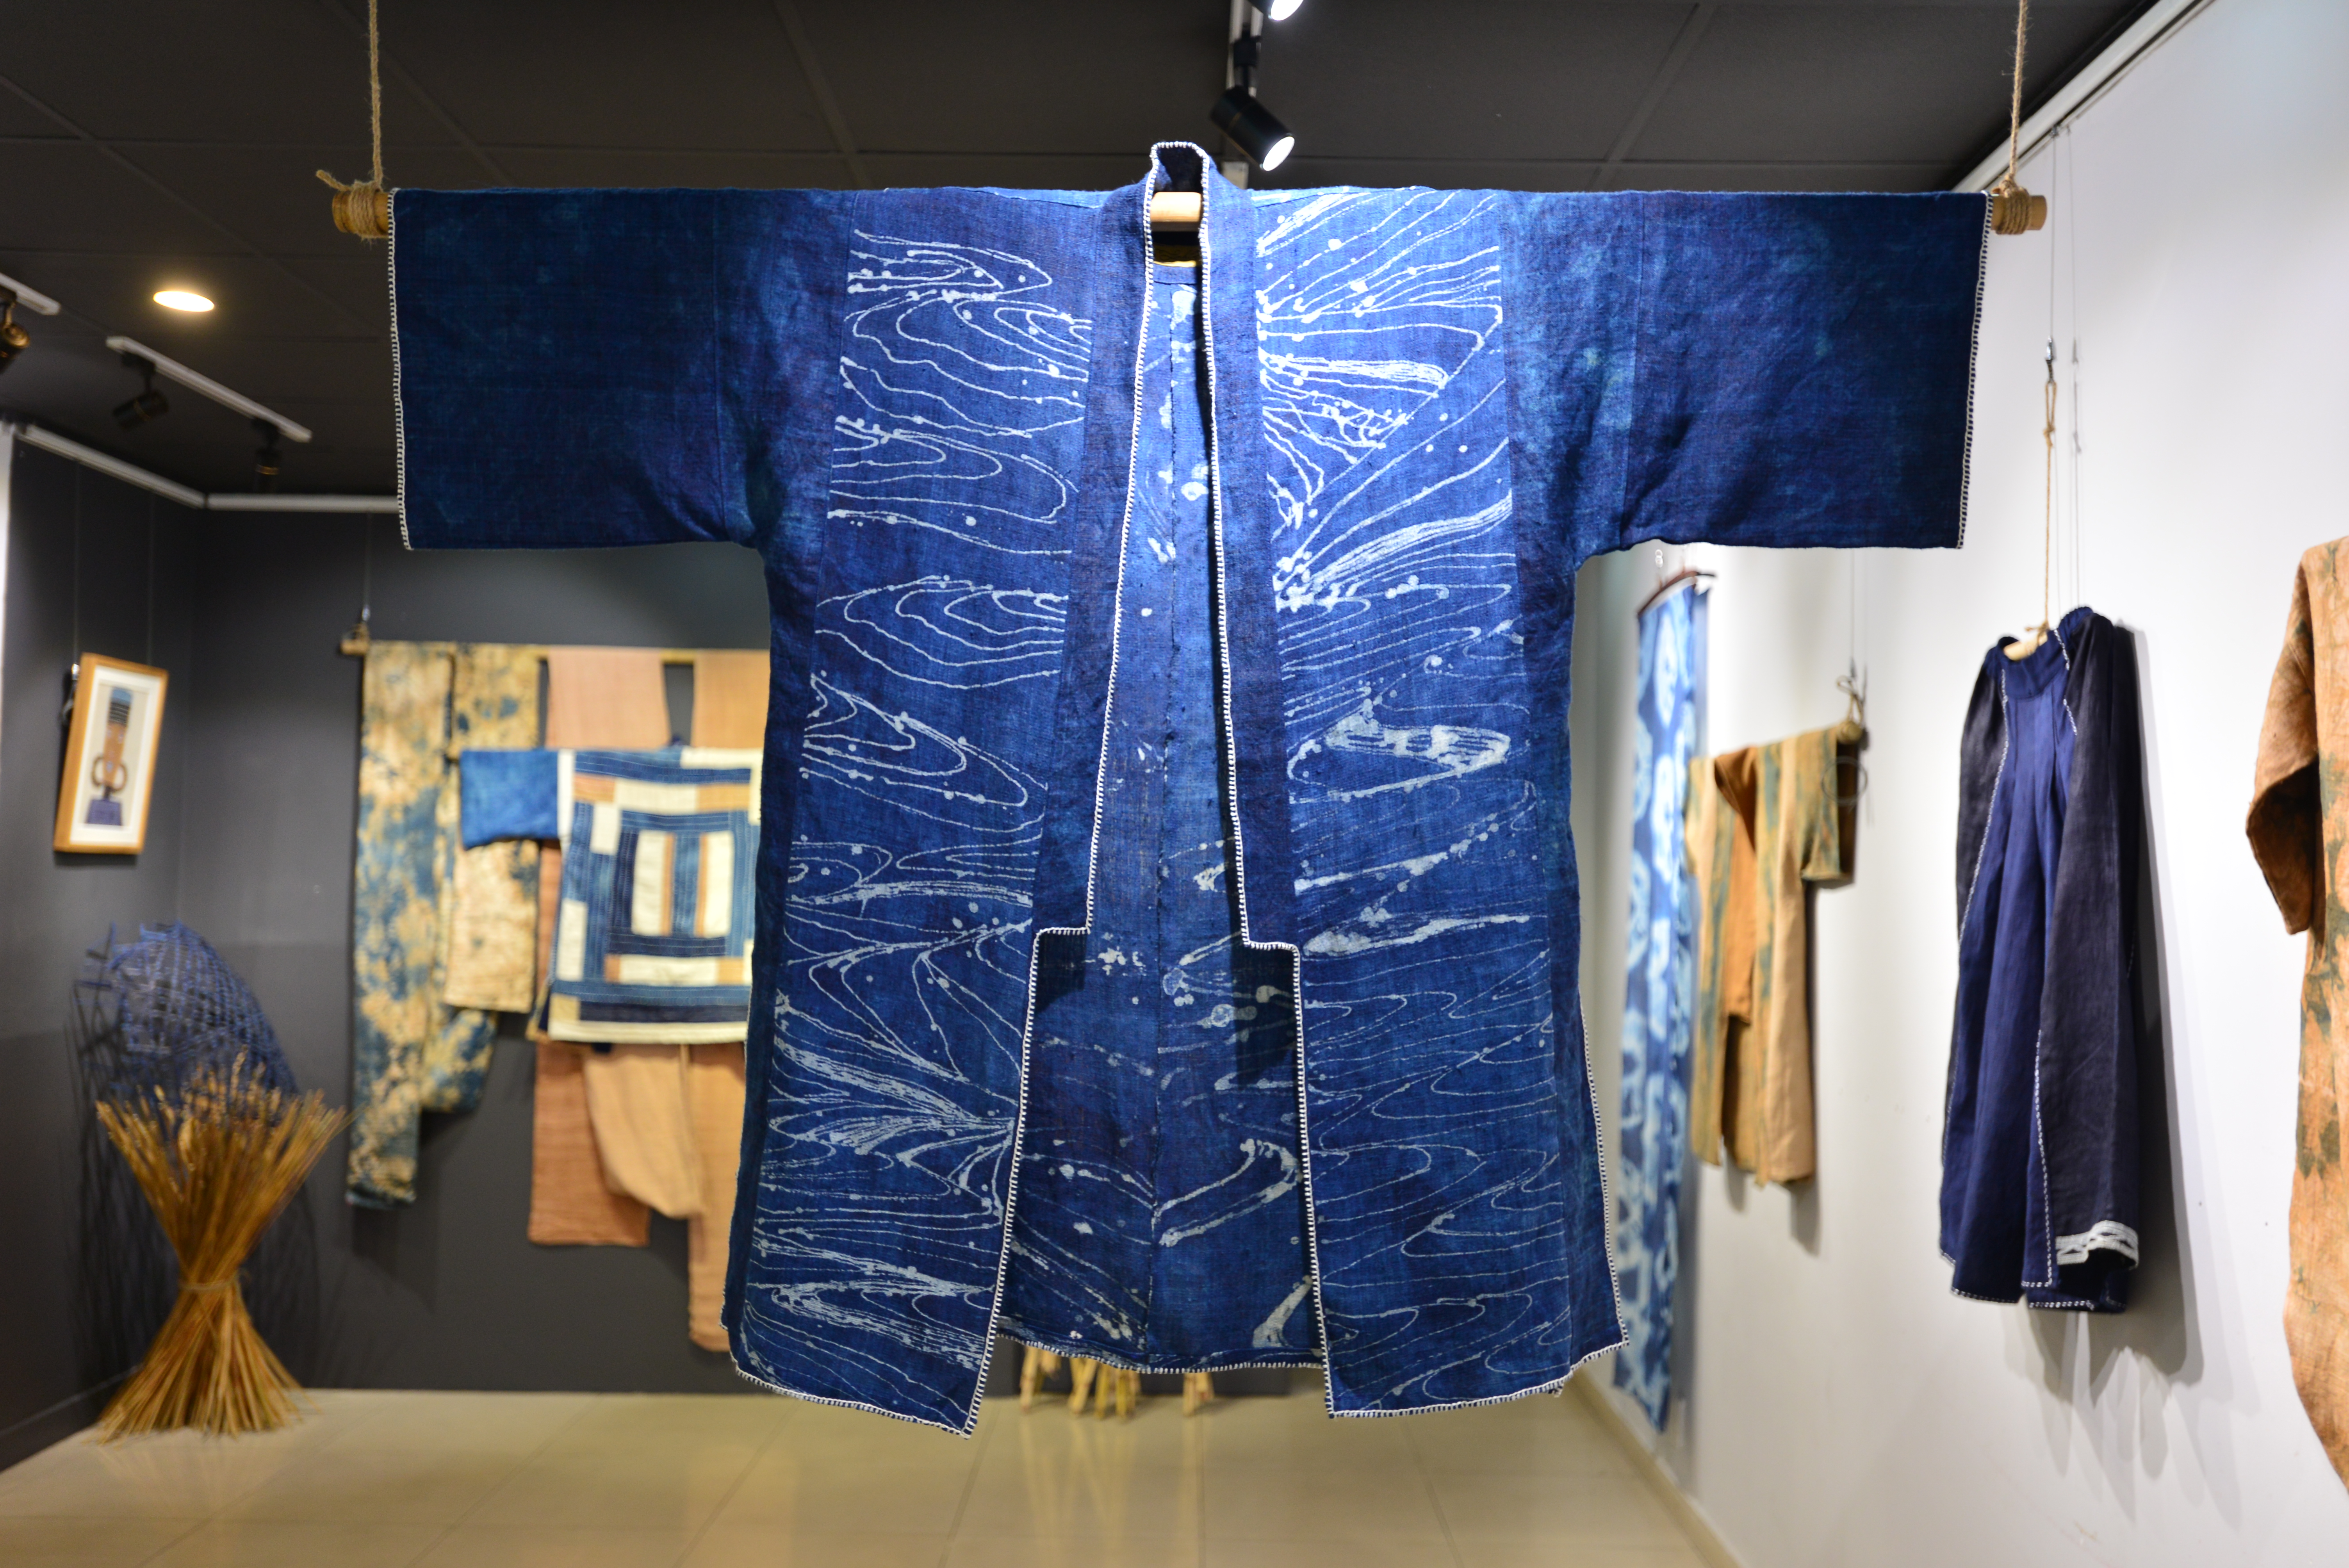 An indigo-coloured coat that is hanging from the ceiling with arms outspread. The fabric itself has a white pattern on it that looks a little like waves or a topographical map.